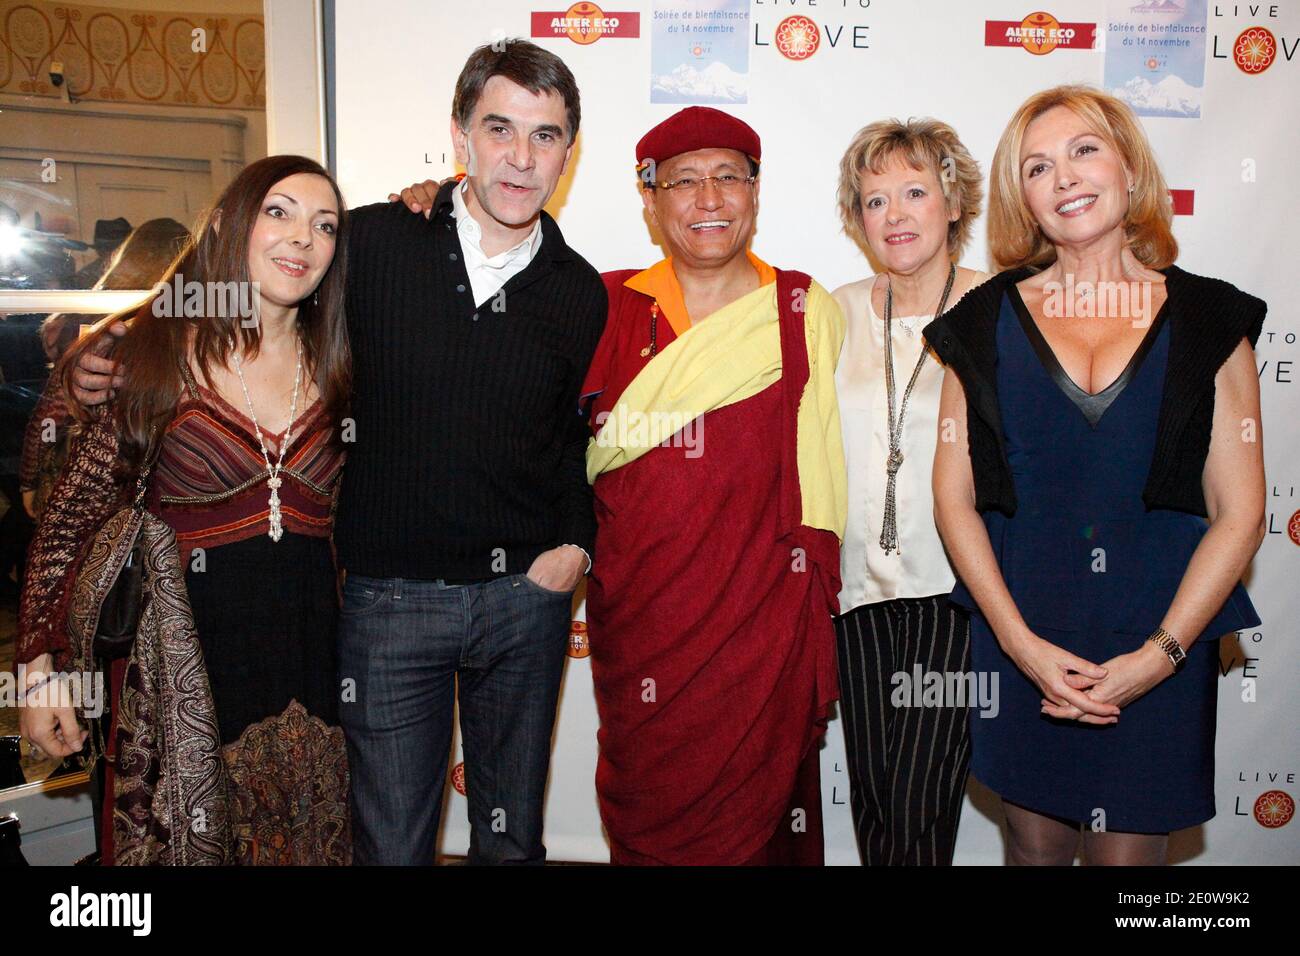 Annabelle De Villedieu, Tex, The Gyalwang Drukpa, Blandine Metayer and Fabienne Amiach at the Gala of Charity 'La Sagesse Au Feminim' by Drukpa Humanitaire held at Hotel Lutetia, in Paris, France, on November 14, 2012. Photo by Audrey Poree/ABACAPRESS.COM Stock Photo